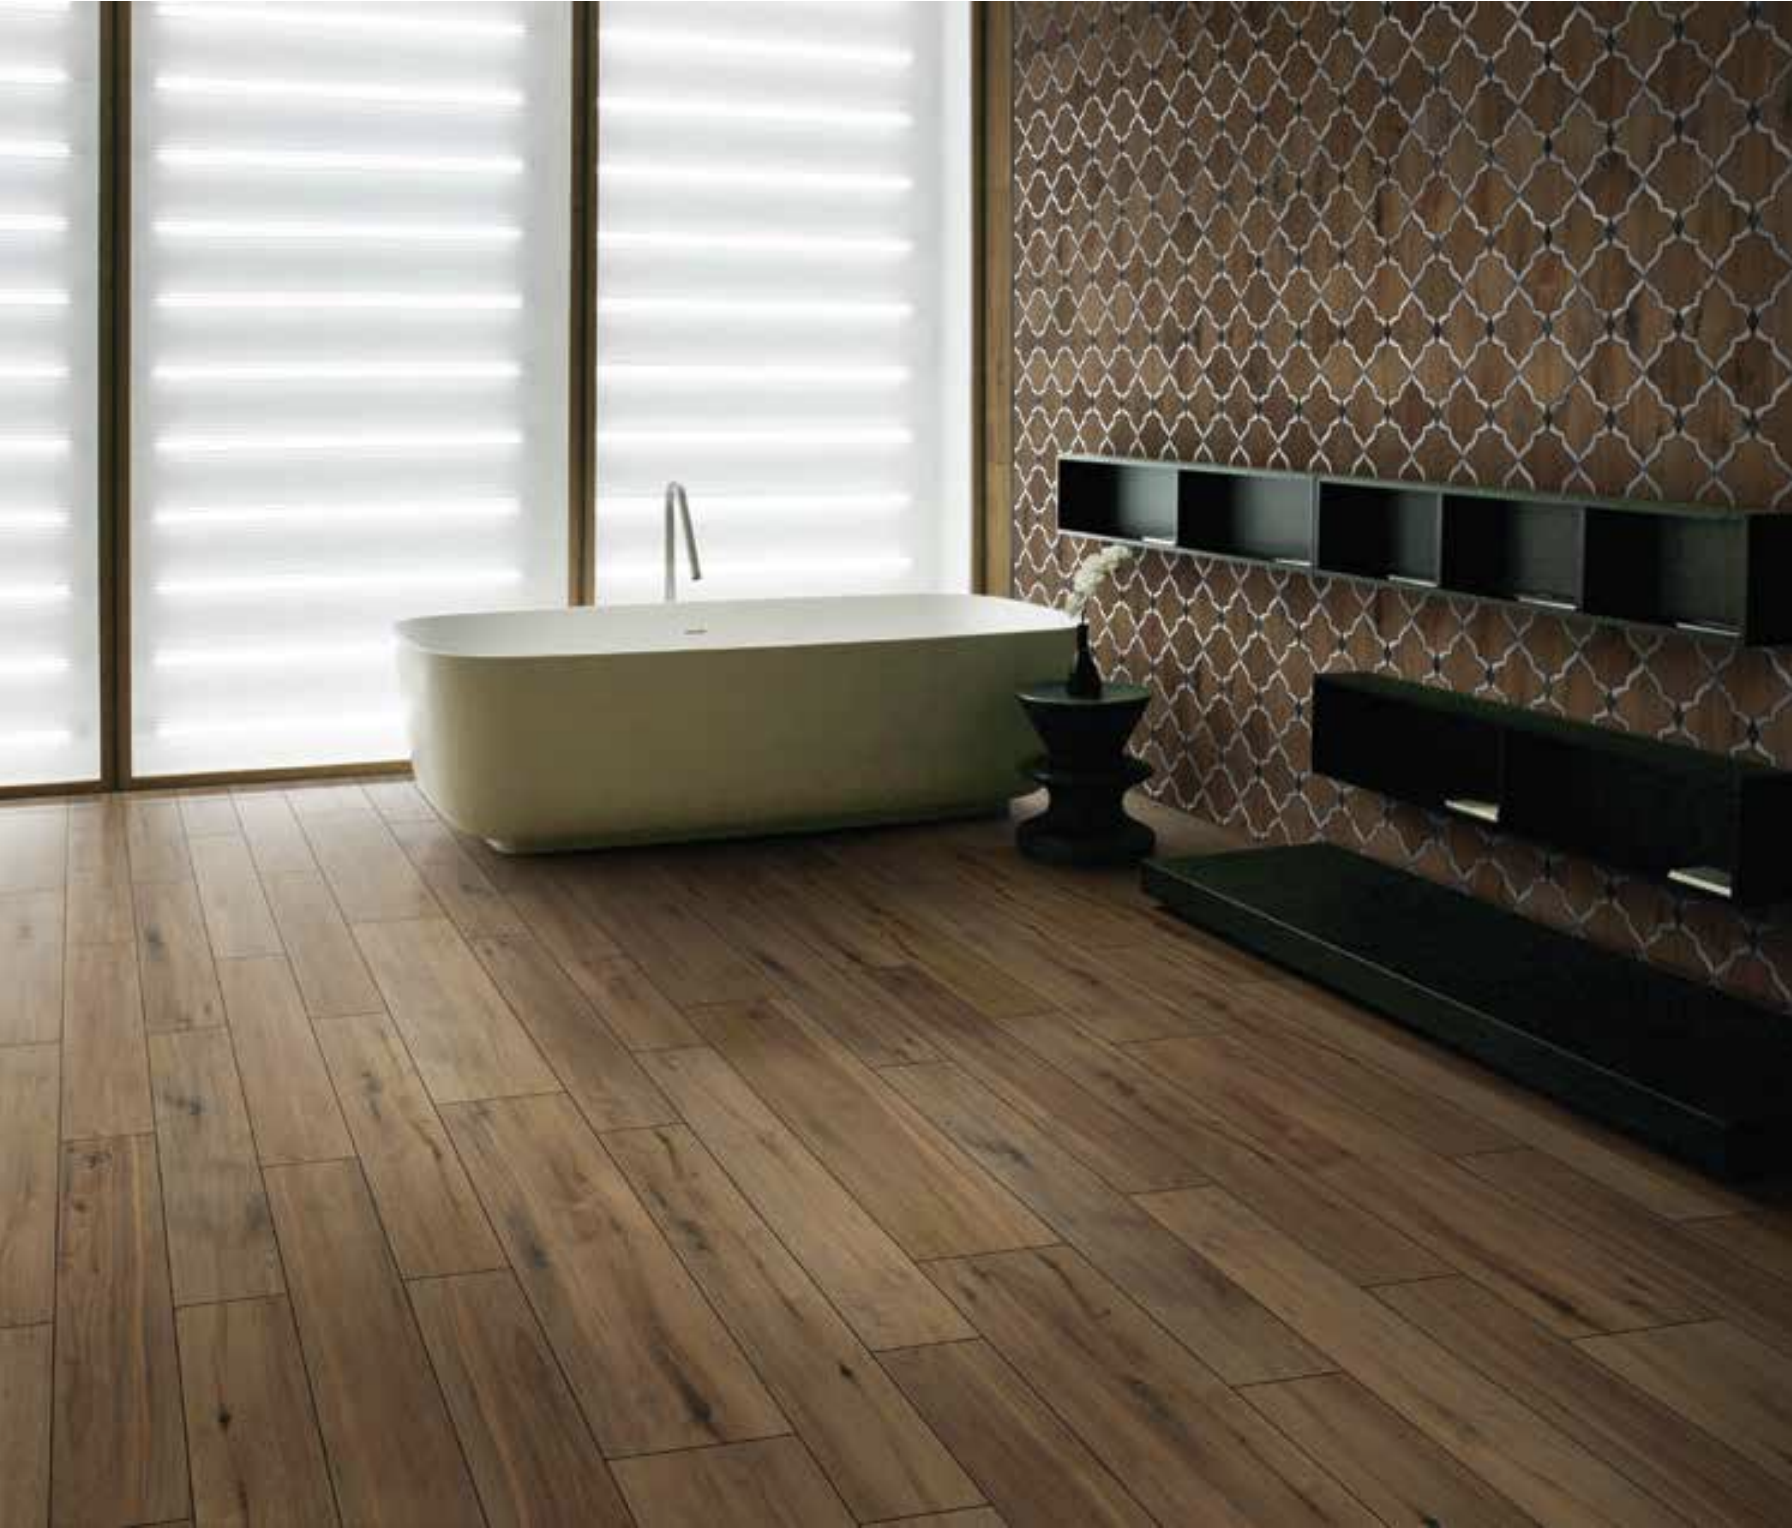 Shows a catalog scene featuring a warm golden natural wood looking tile. Looks just like a wood floor!